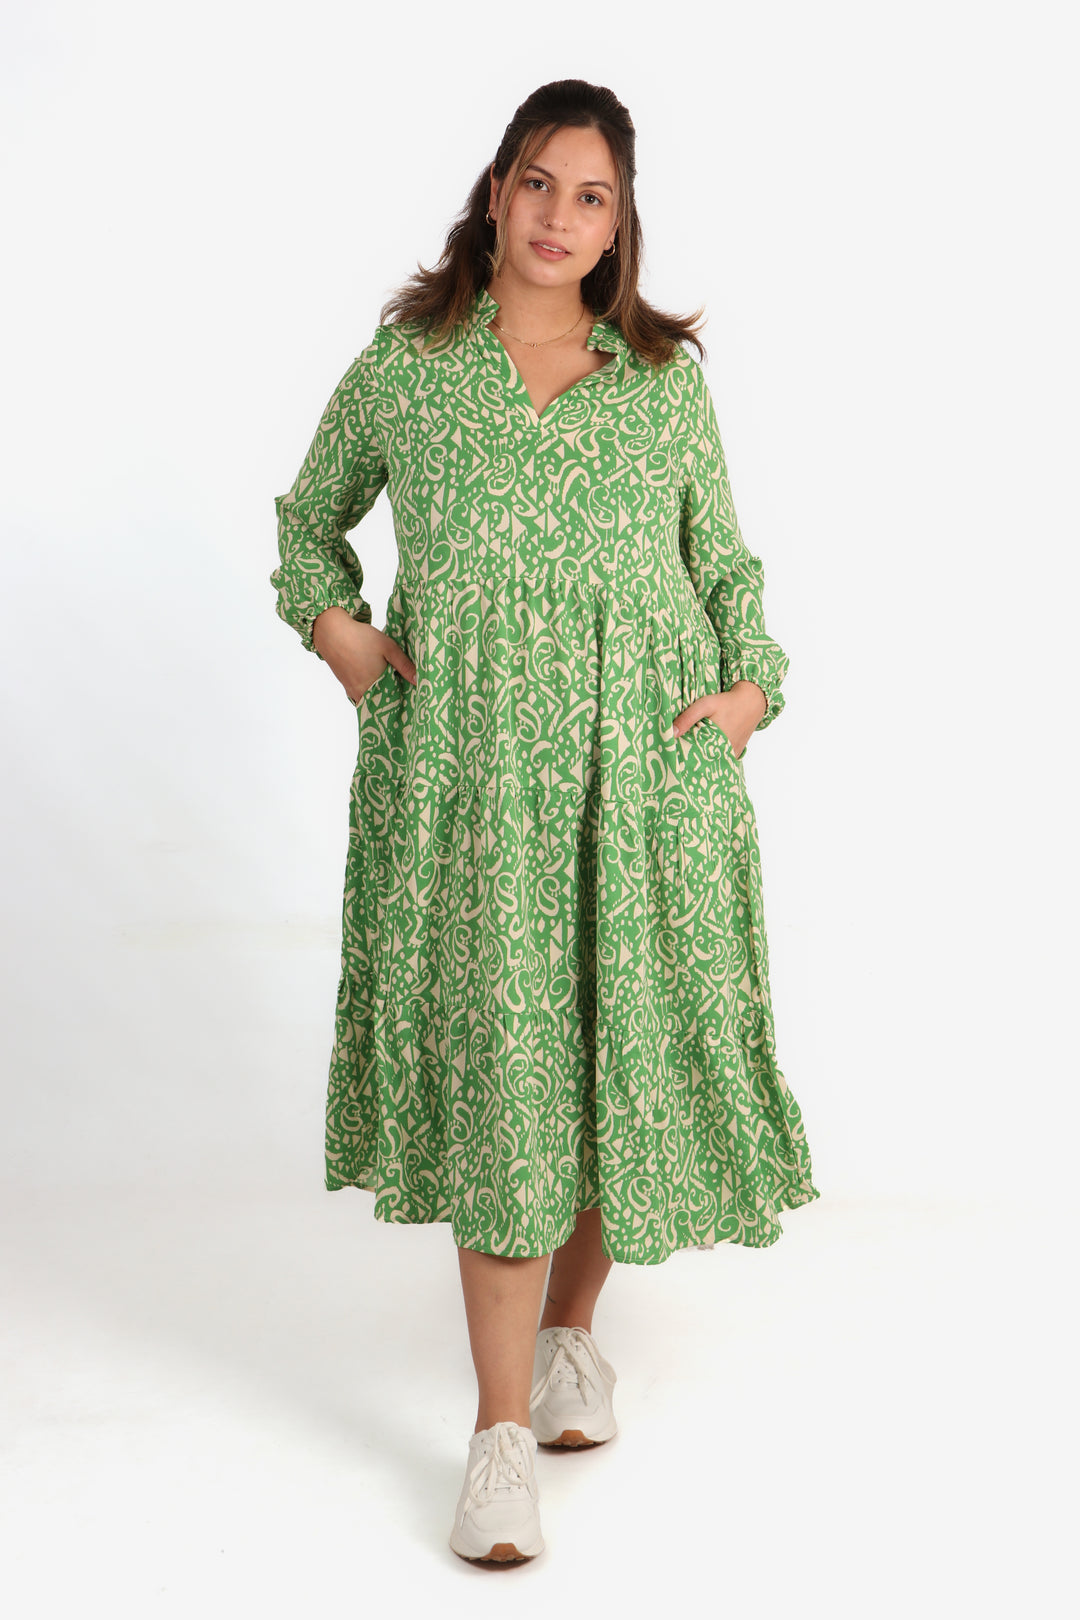 model wearing a midi length long sleeve dress with an all over aztec print pattern in green and cream